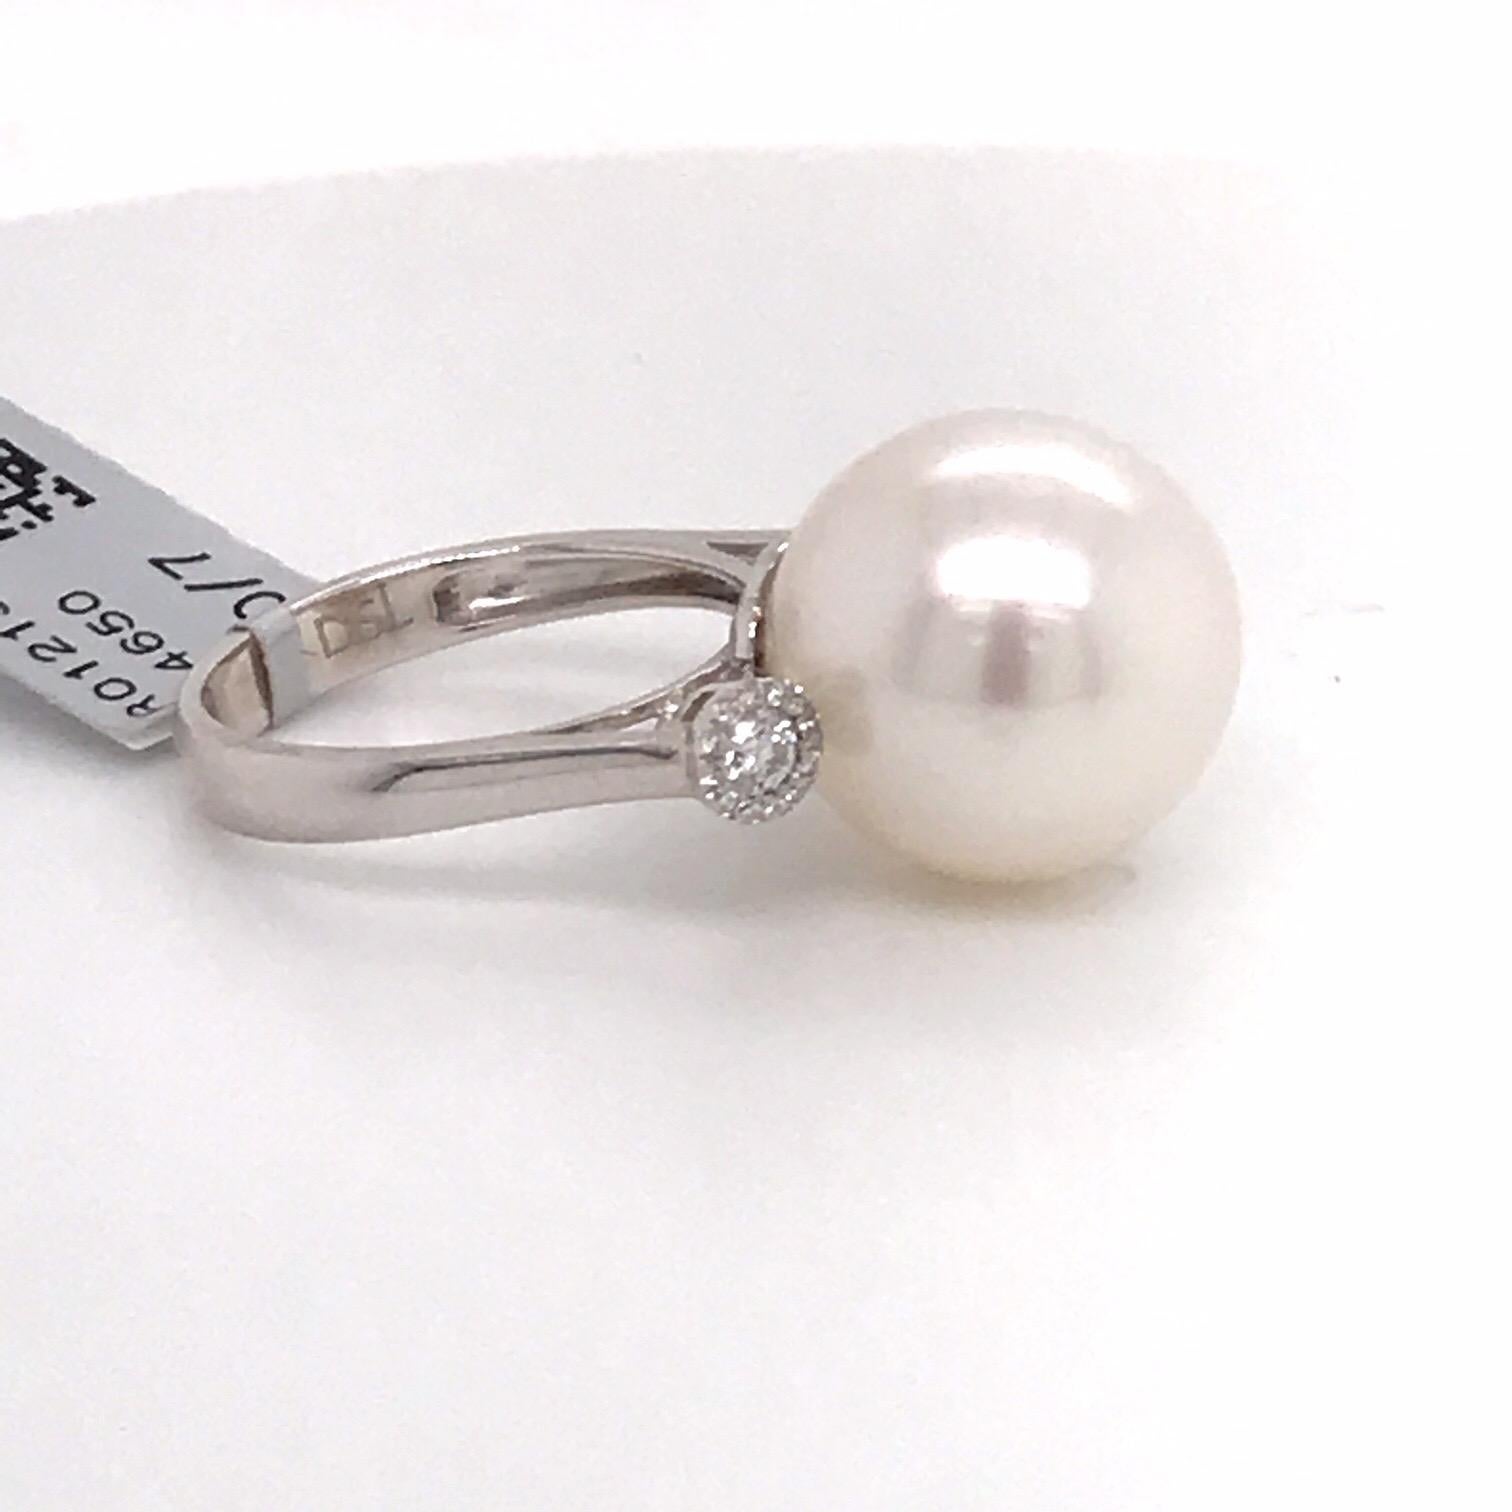 18K White gold three stone ring featuring one South Sea Pearl center measuring 14-15 MM flanked with 26 round diamonds weighing 0.12 carats. 

Measurements:
South Sea Pearl: 14-15 MM
Diamond Circle: 4.36 MM
Height On Finger: 15.4 MM

Ring can be